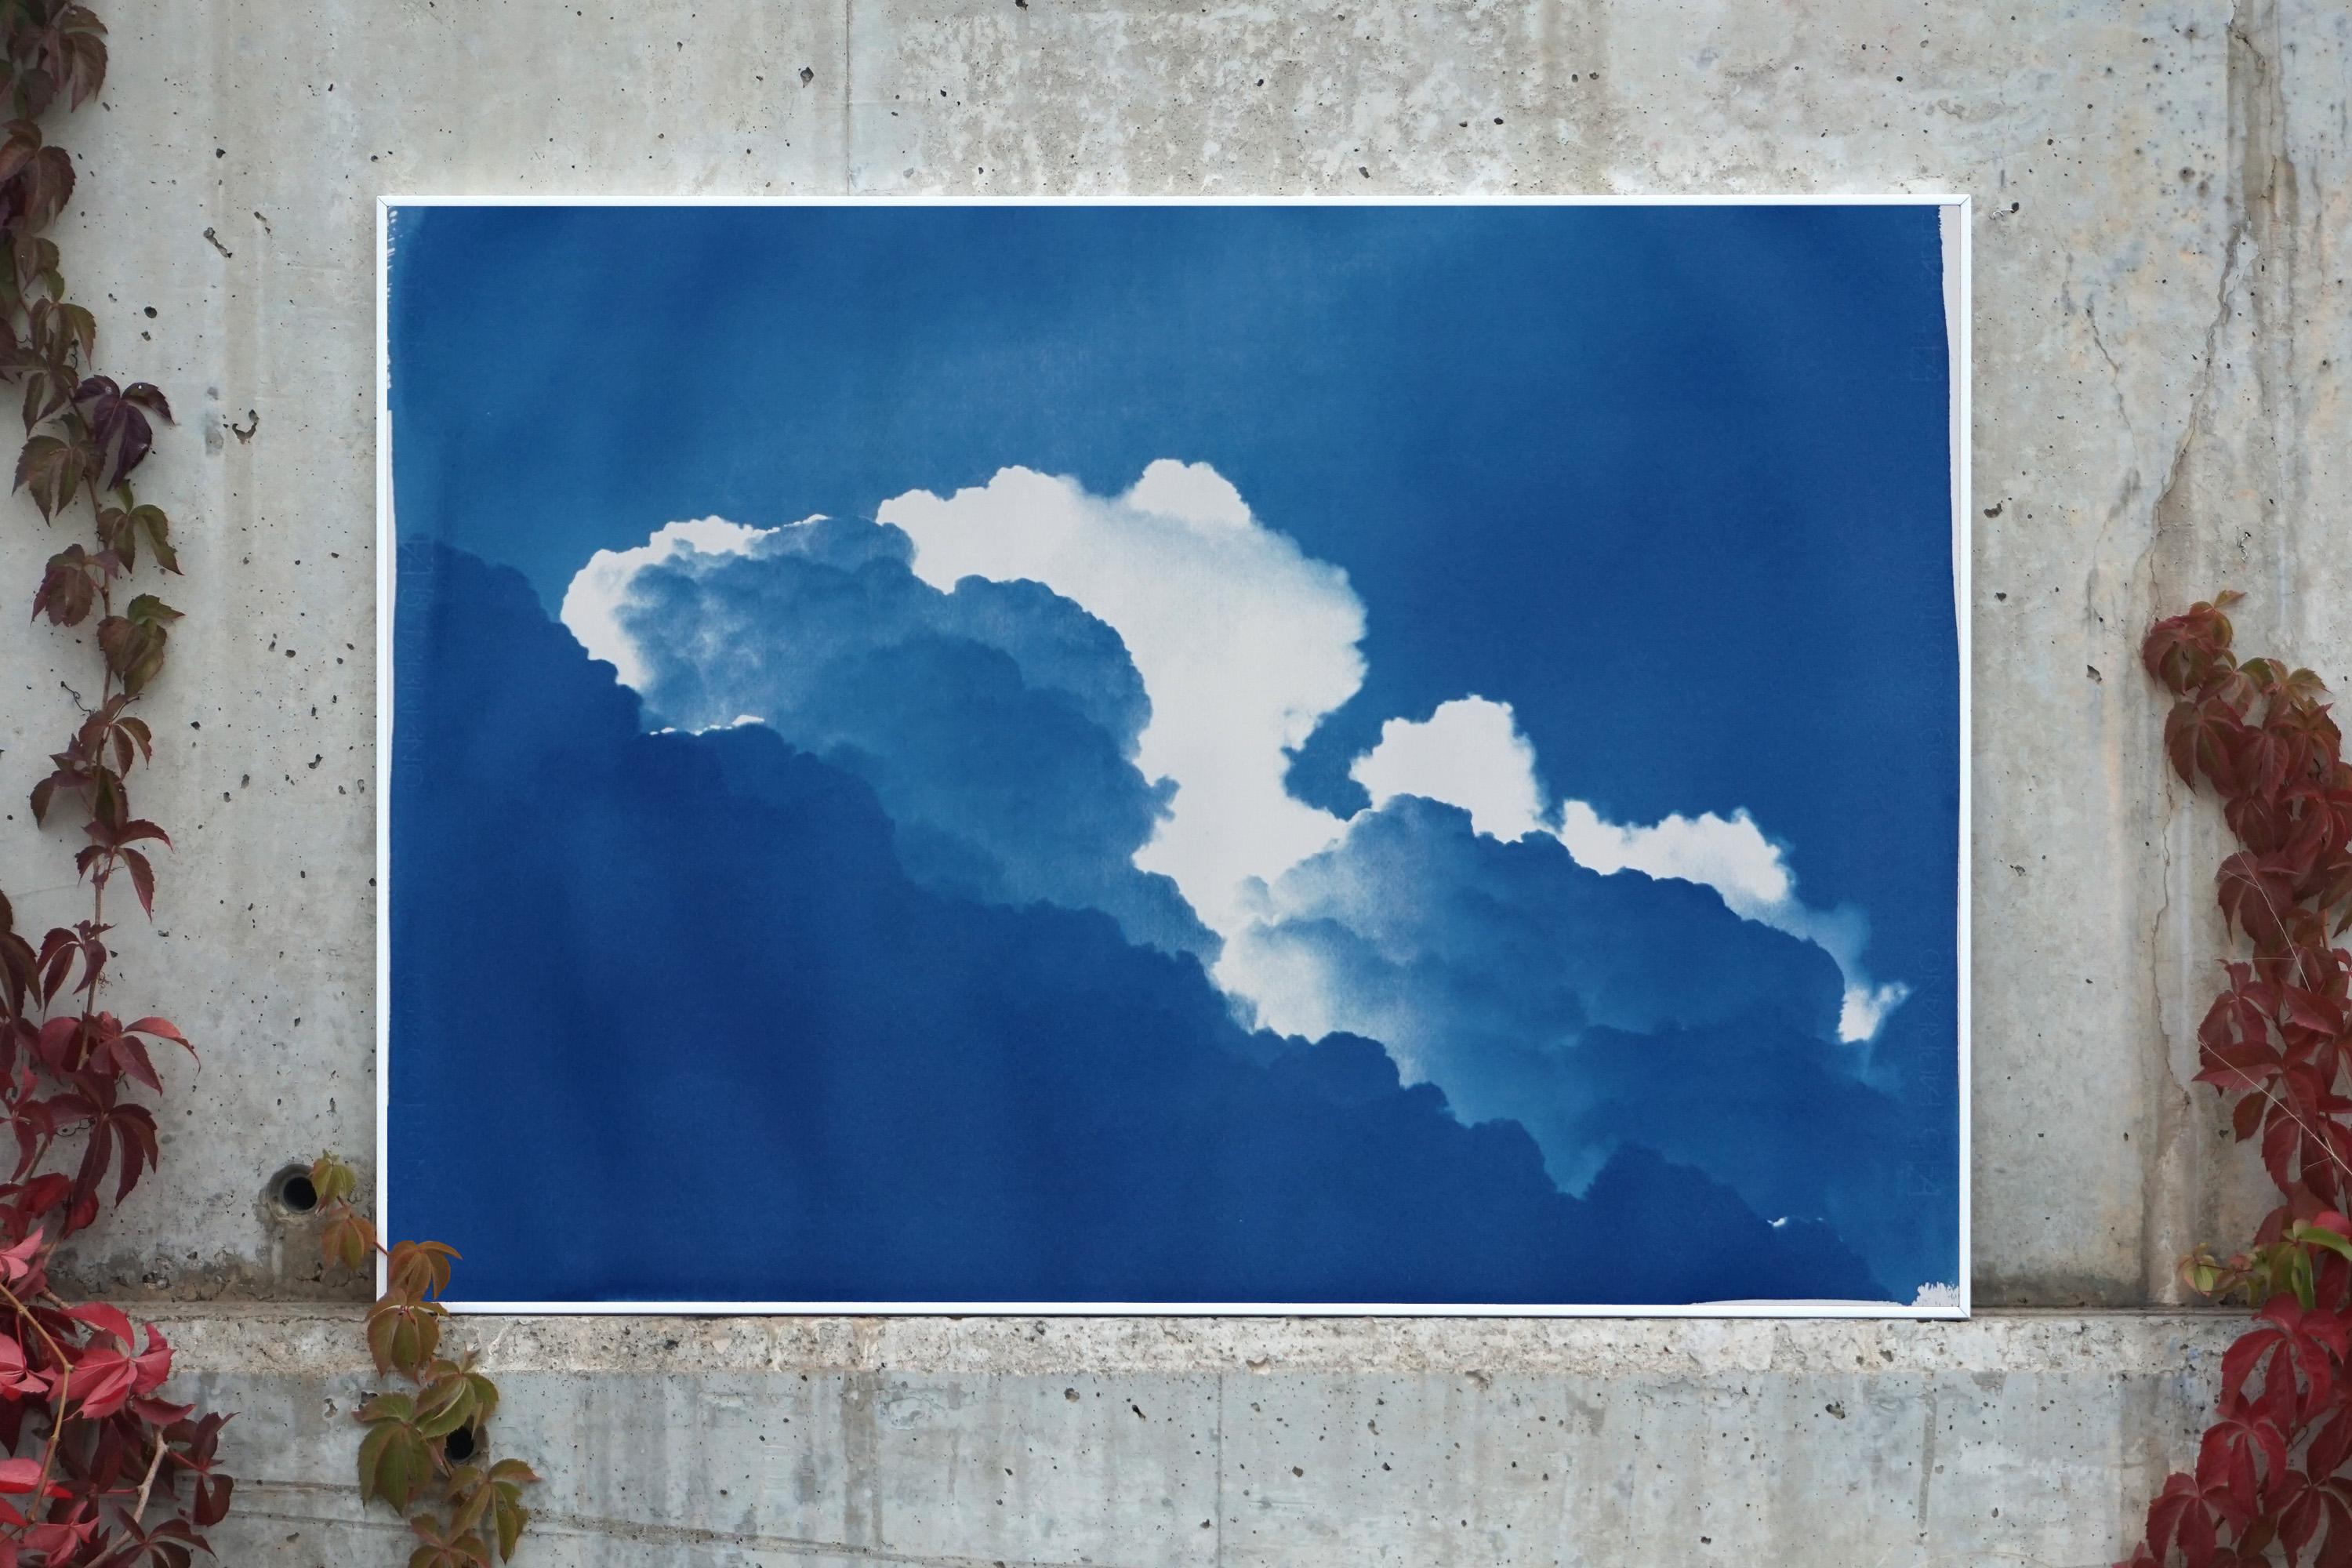 Yves Klein Clouds, Cyanotype on Paper, Contemporary Blueprint, Indigo Landscape  - Art by Kind of Cyan